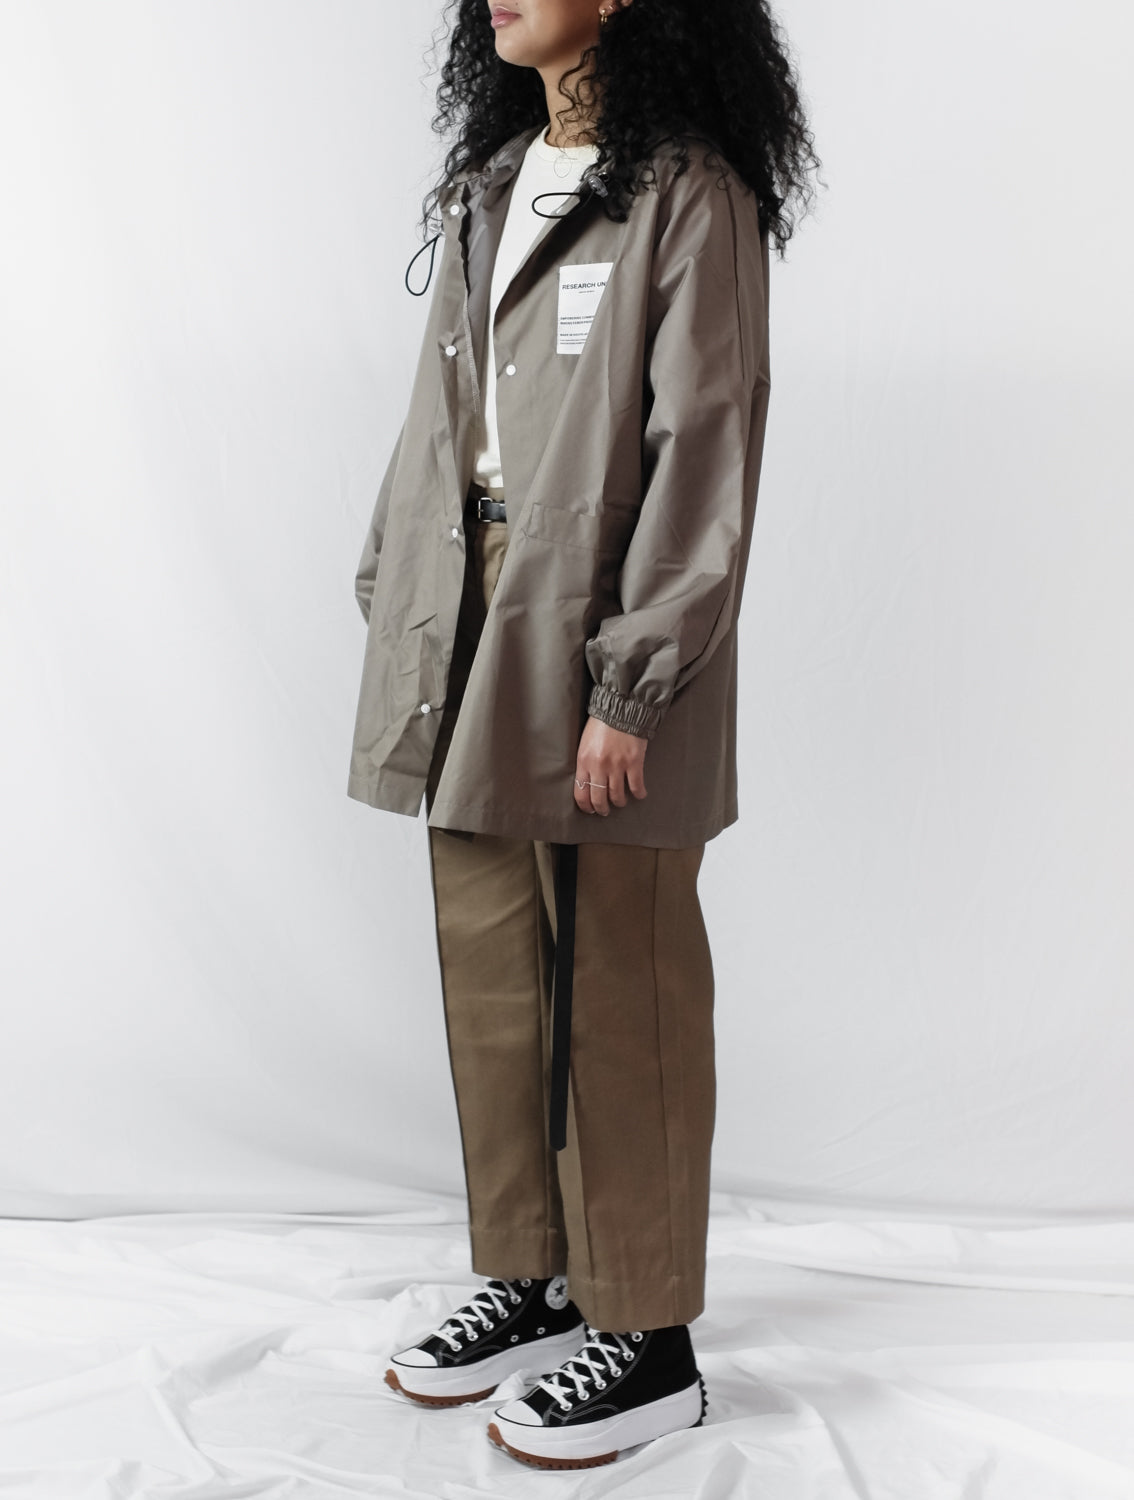 Ripstop Waterproof Rain Jacket (Stone) High Quality and Premium materials. Mid length and unisex